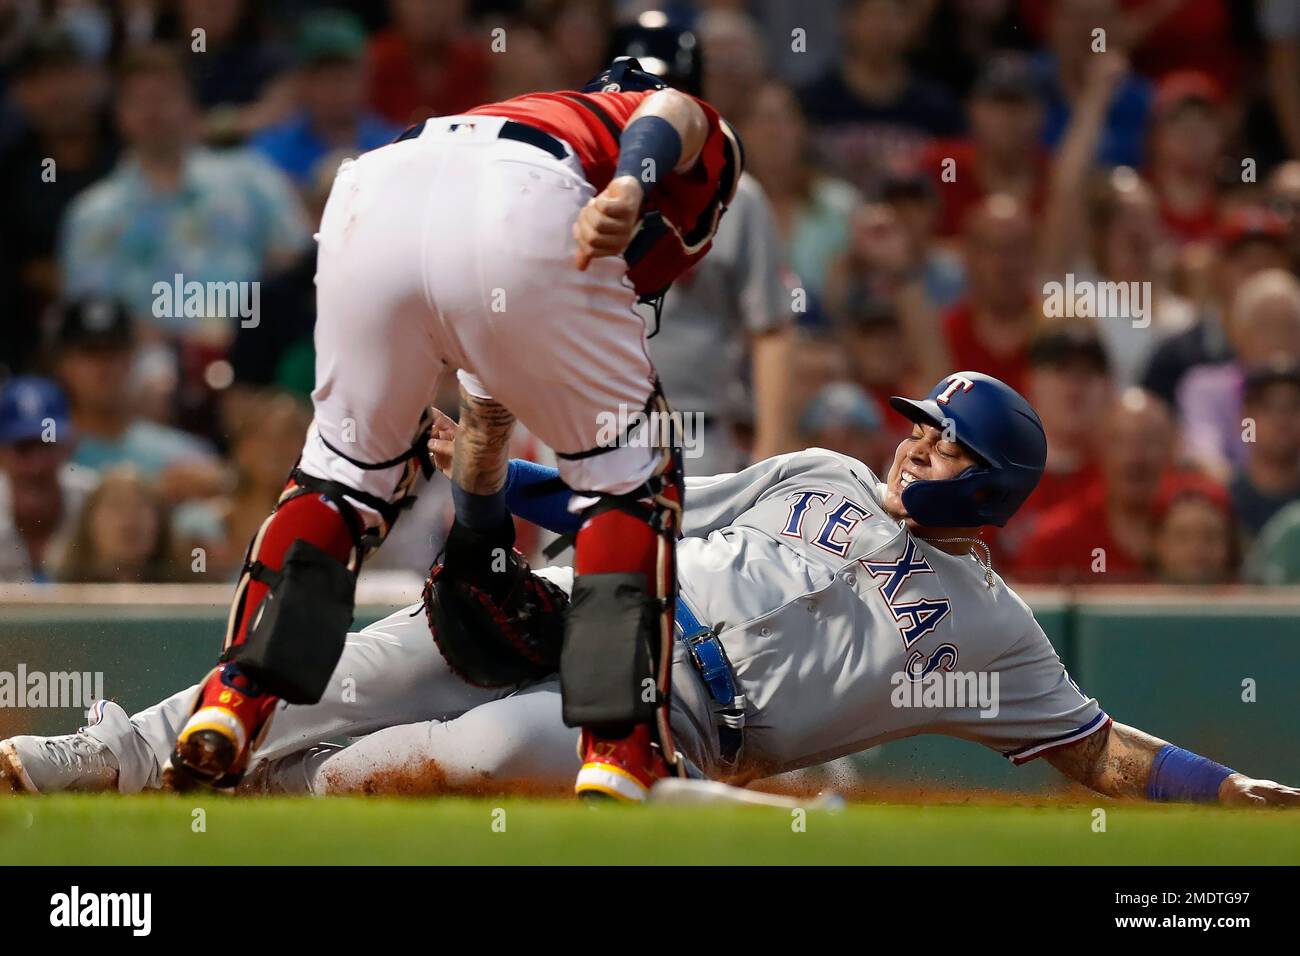 Texas Rangers' Yohel Pozo, right, beats the tag from Boston Red Sox's  Christian Vazquez at home plate on a single by Brock Holt during the second  inning of a baseball game, Saturday